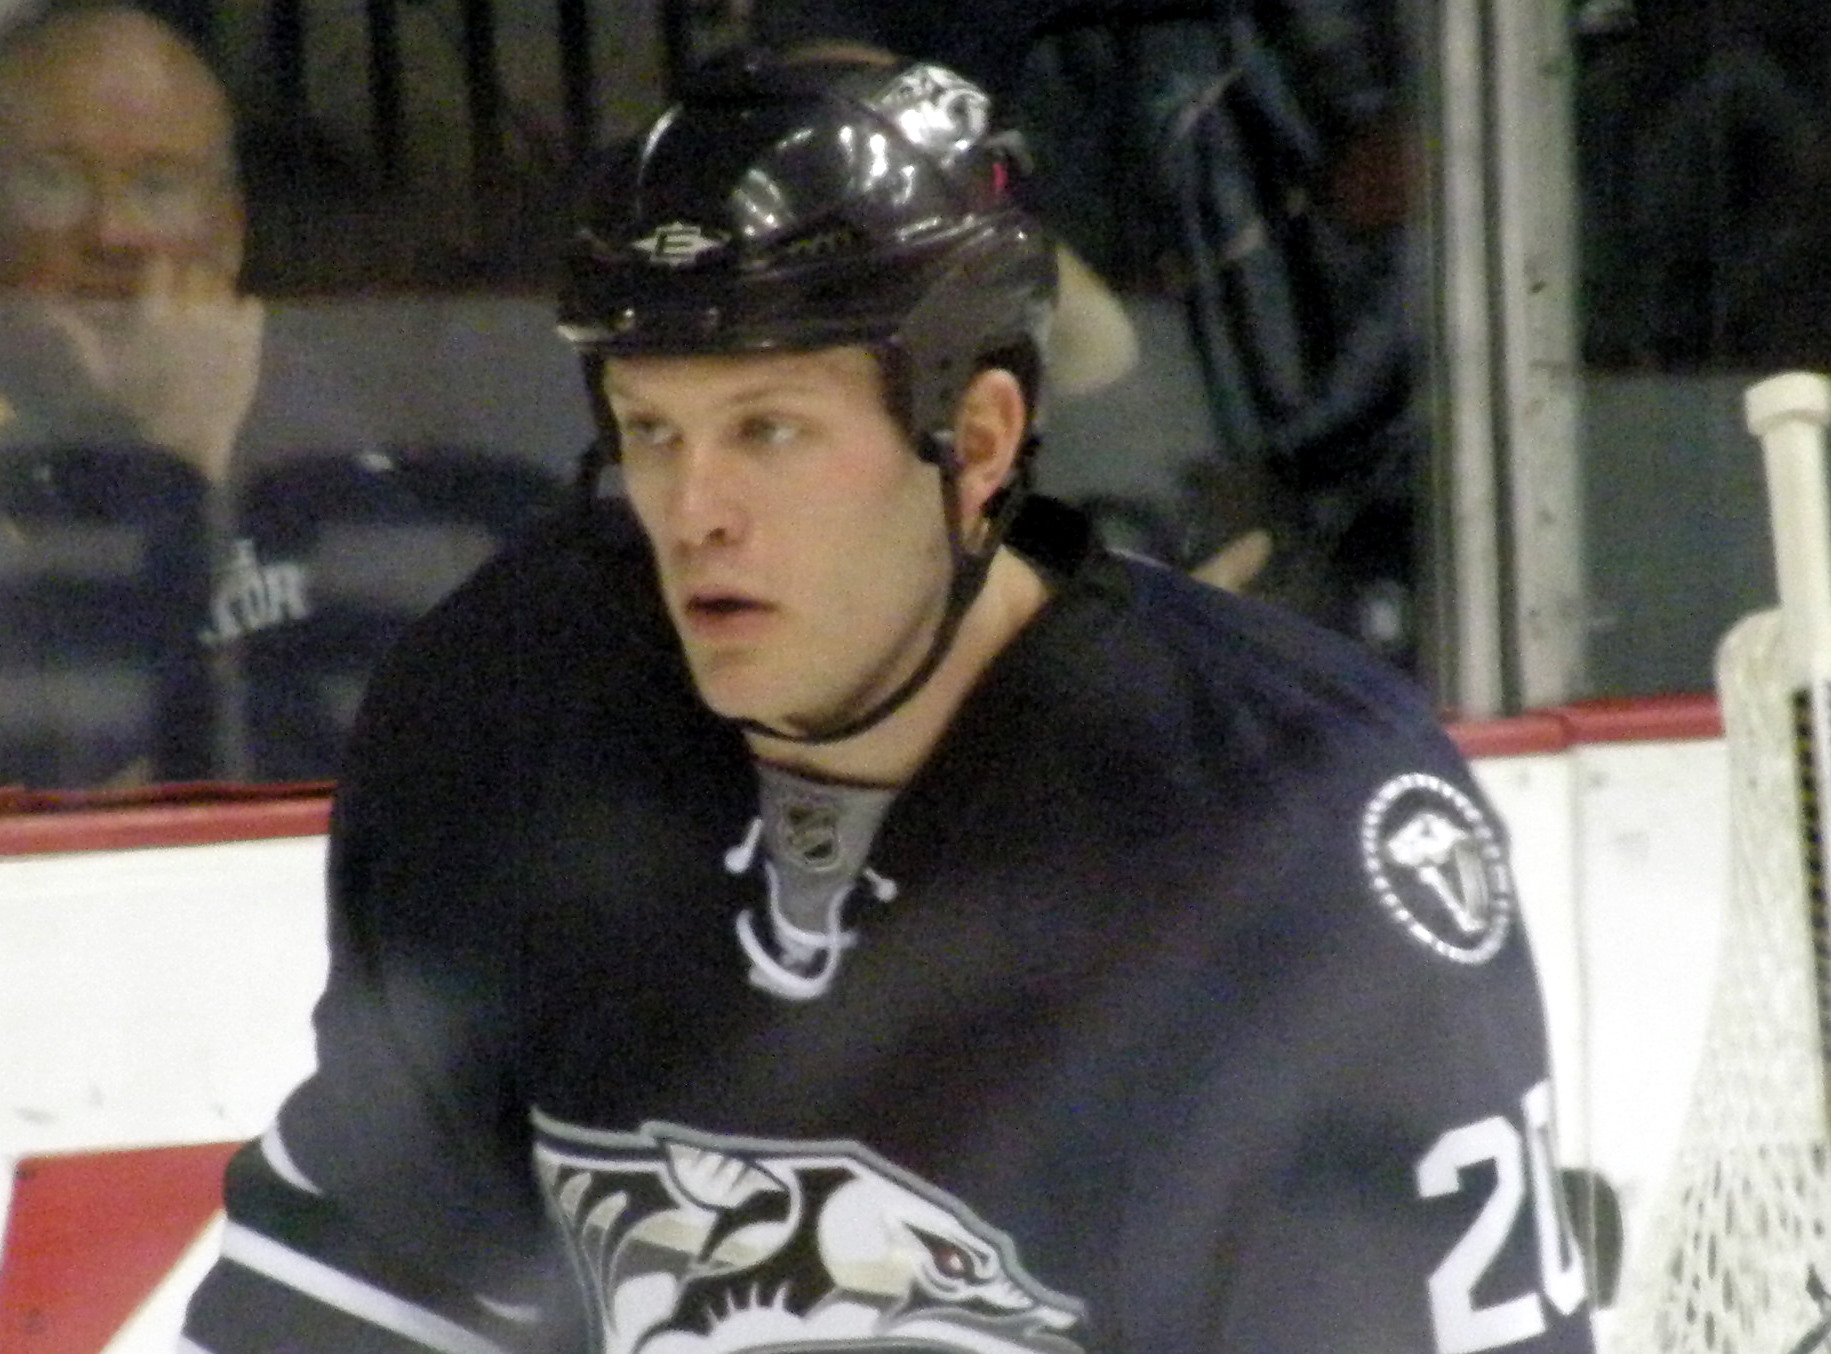 a hockey player wearing black and white standing on the ice